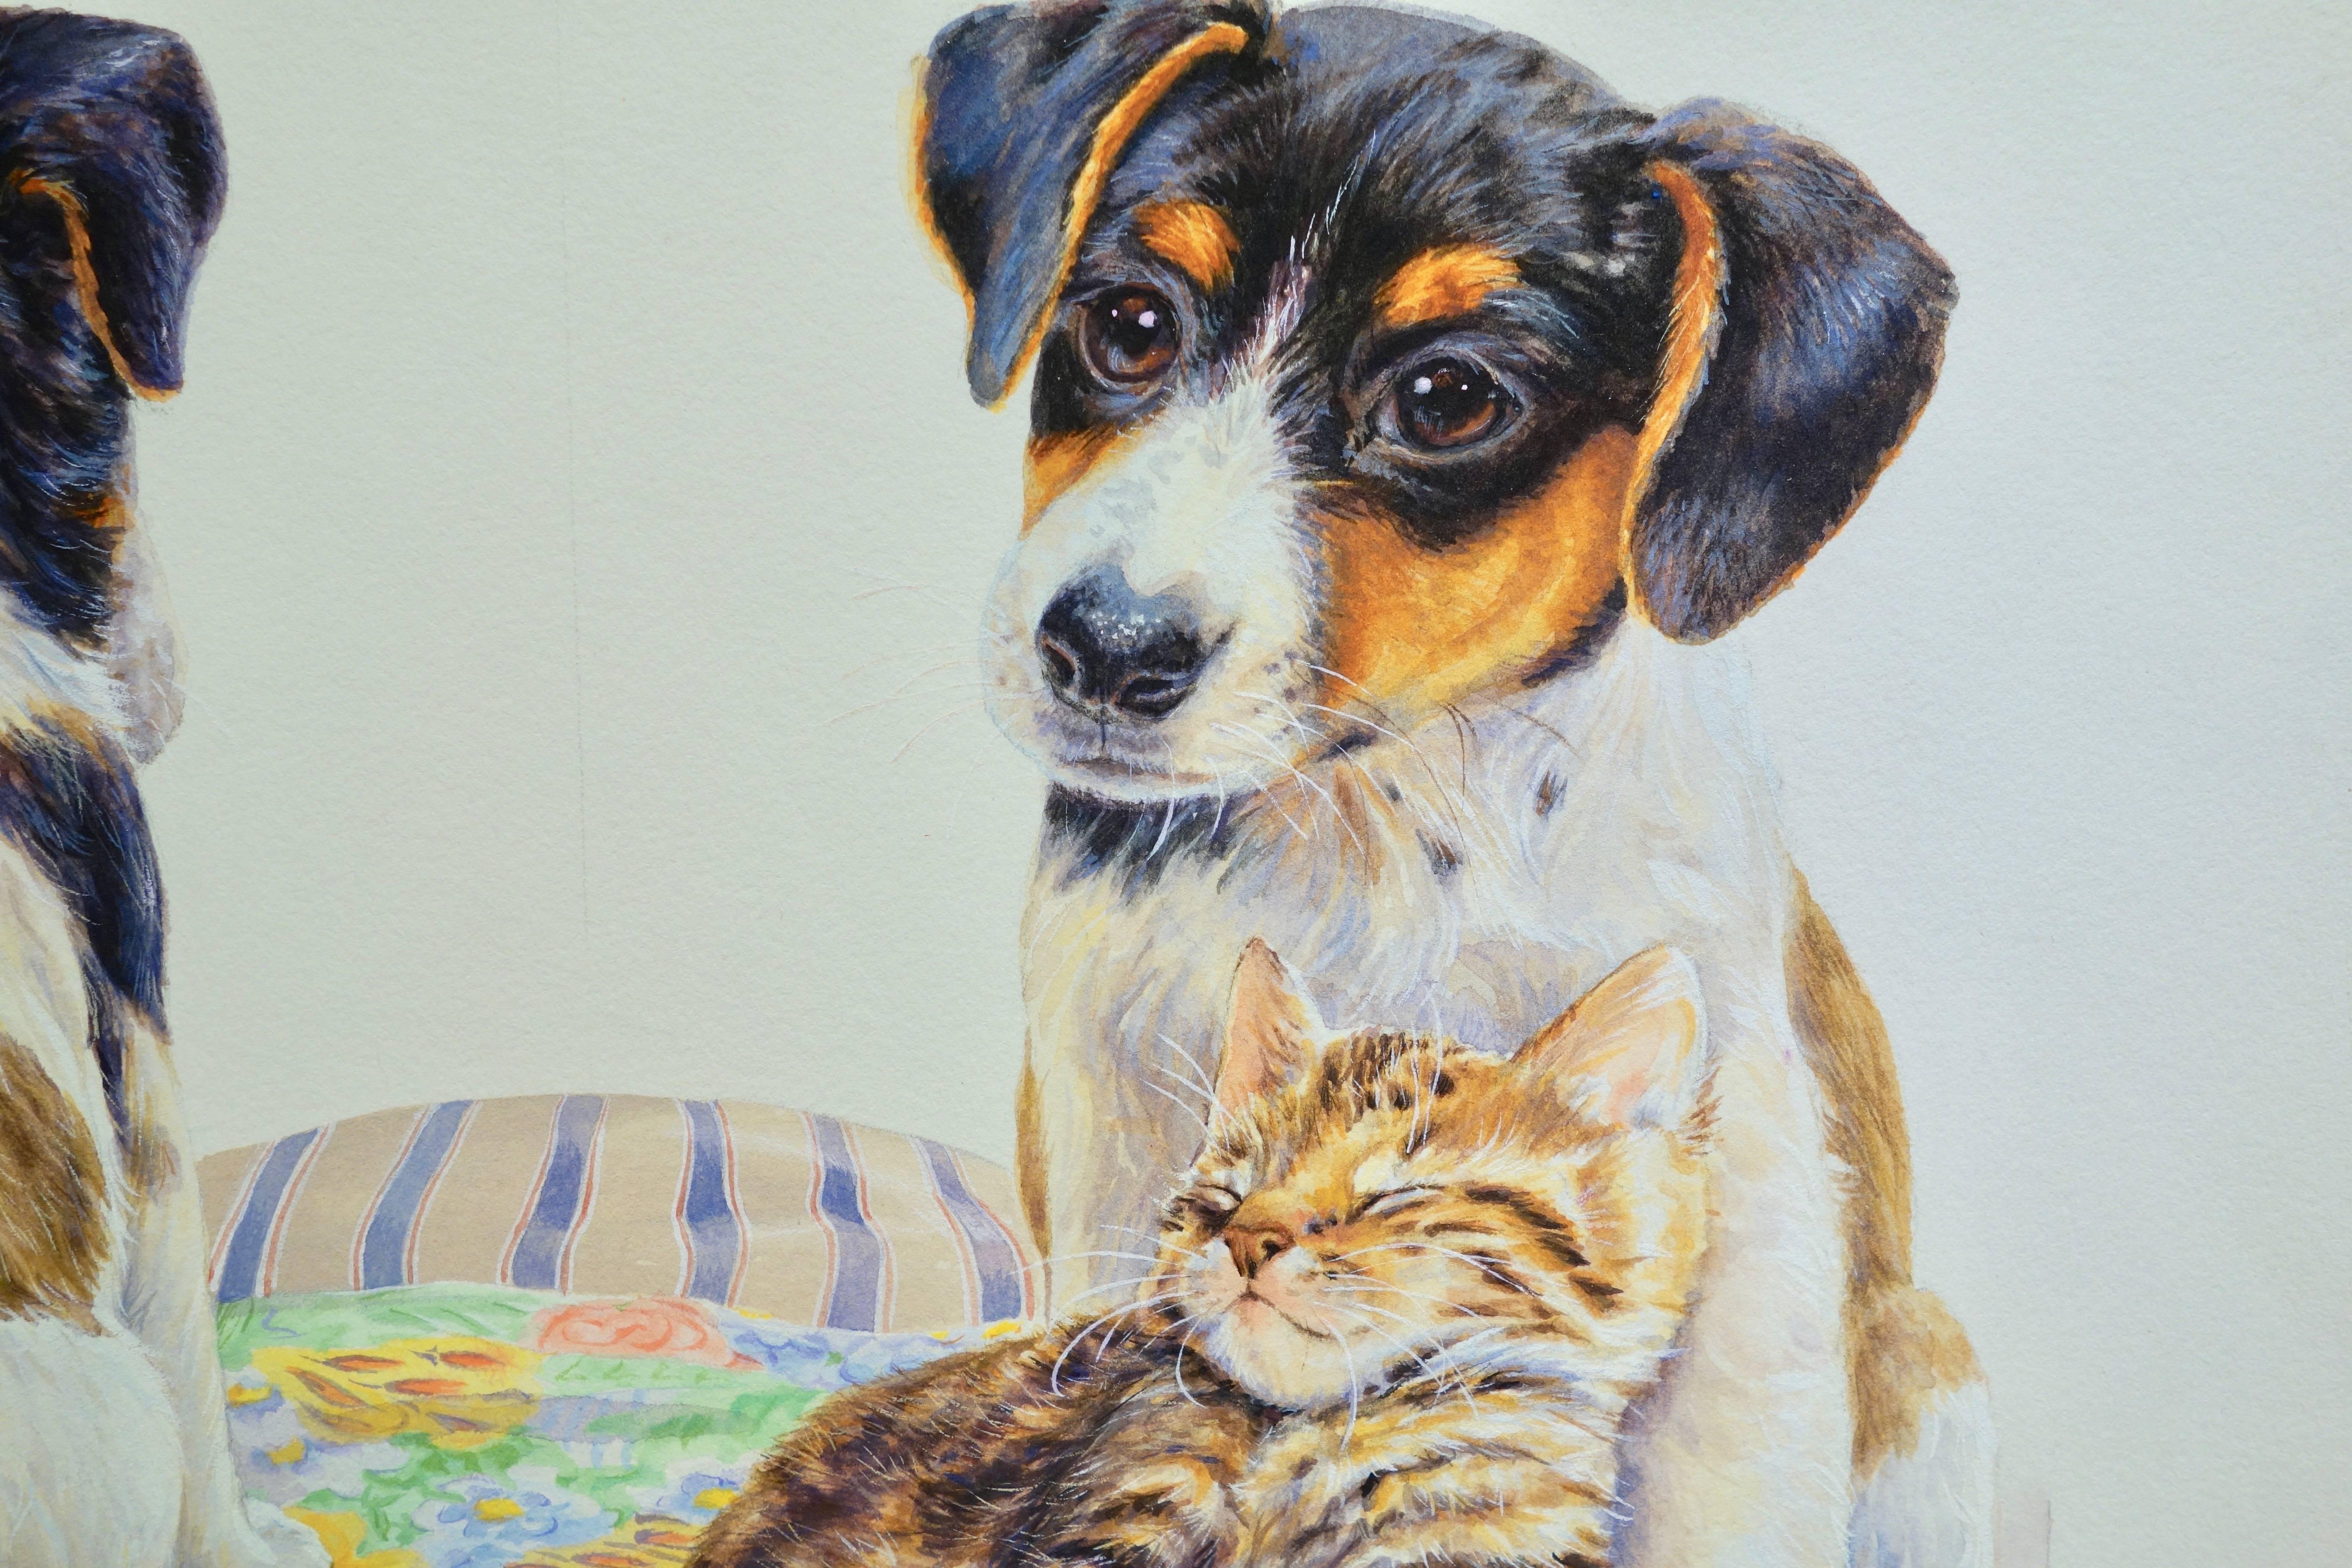 Jack Russell Puppies seated with a Kitten - Art by Debbie Allwright